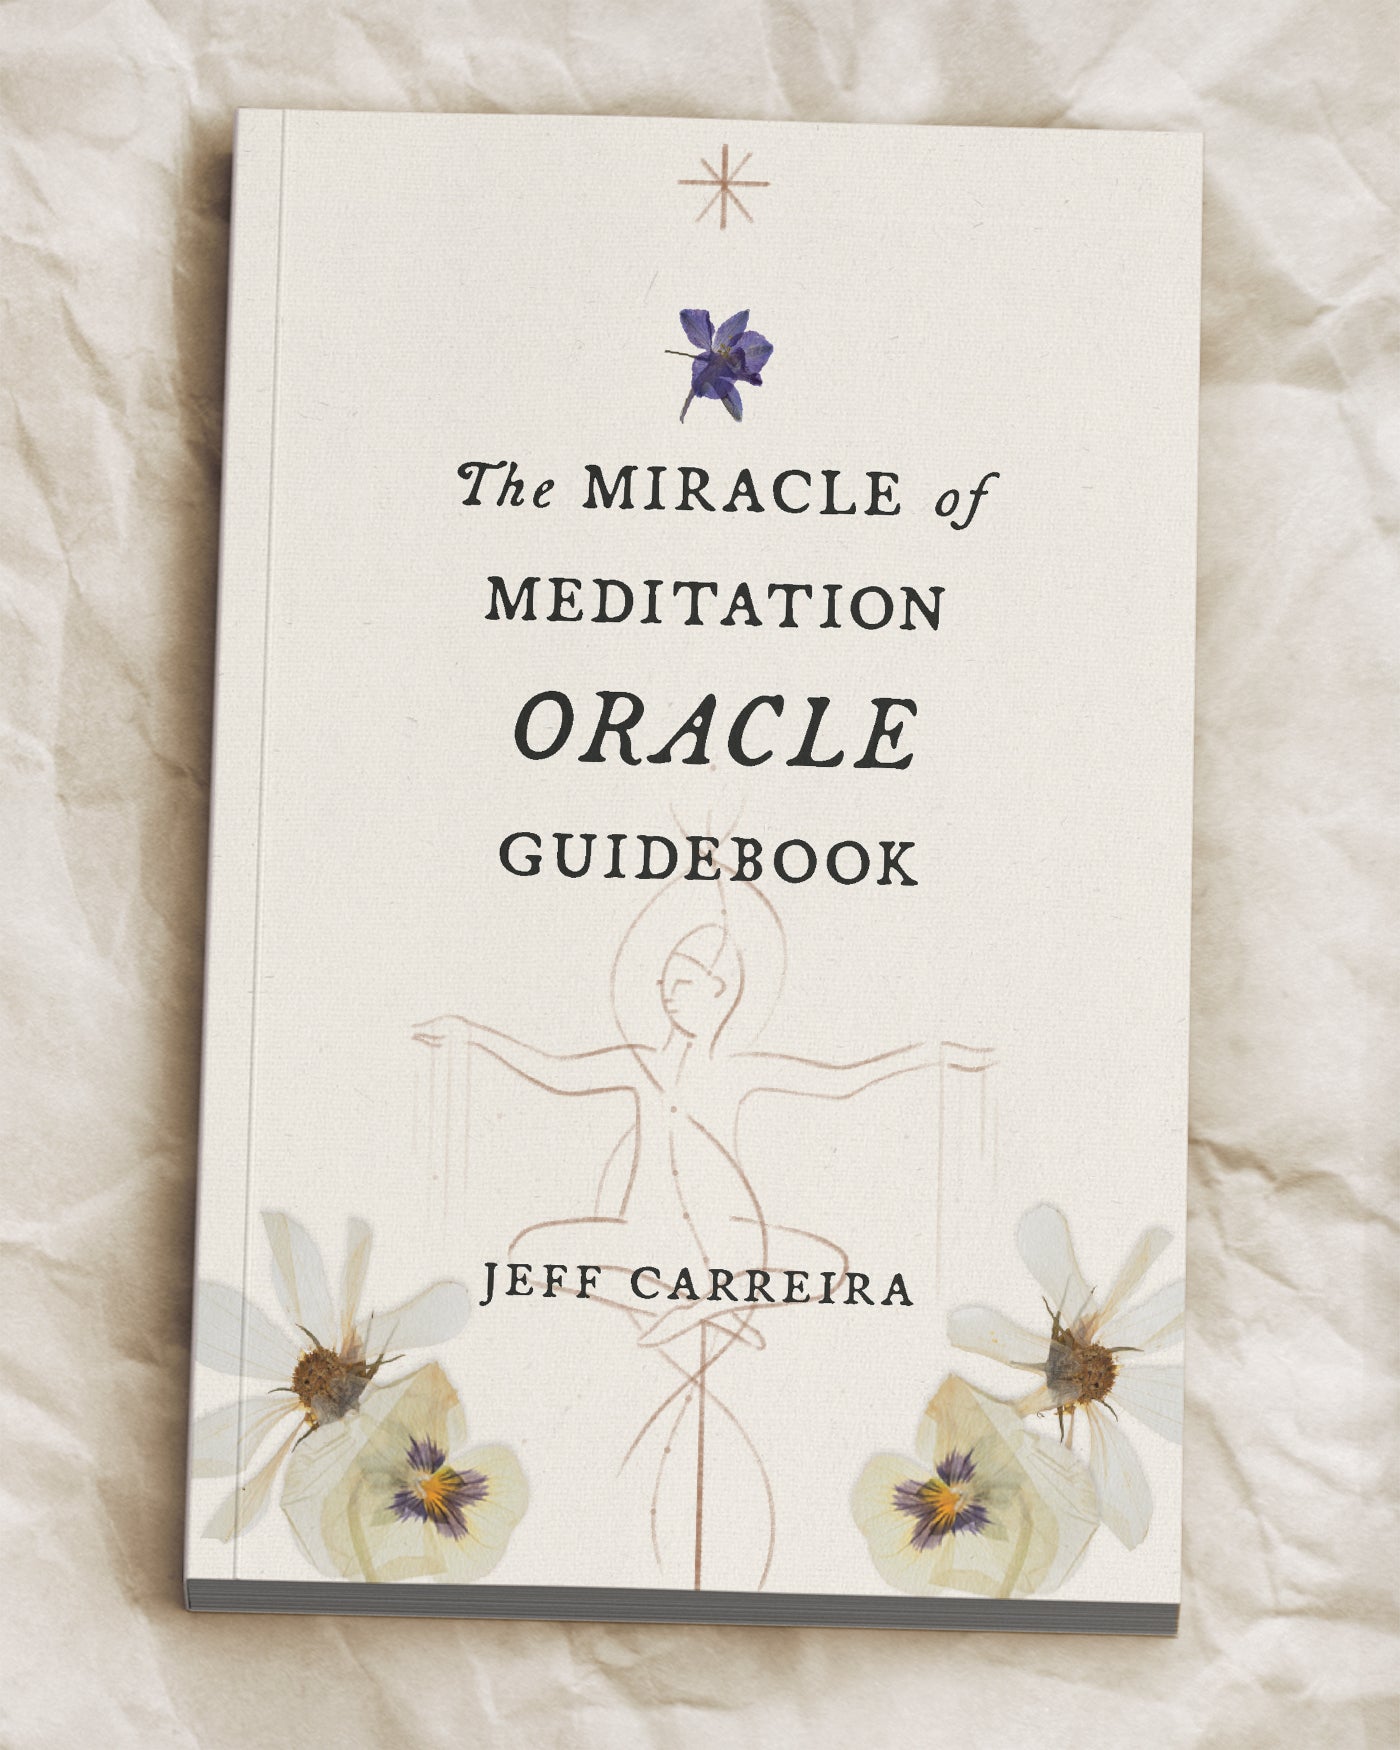 The Miracle of Meditation Oracle Guidebook